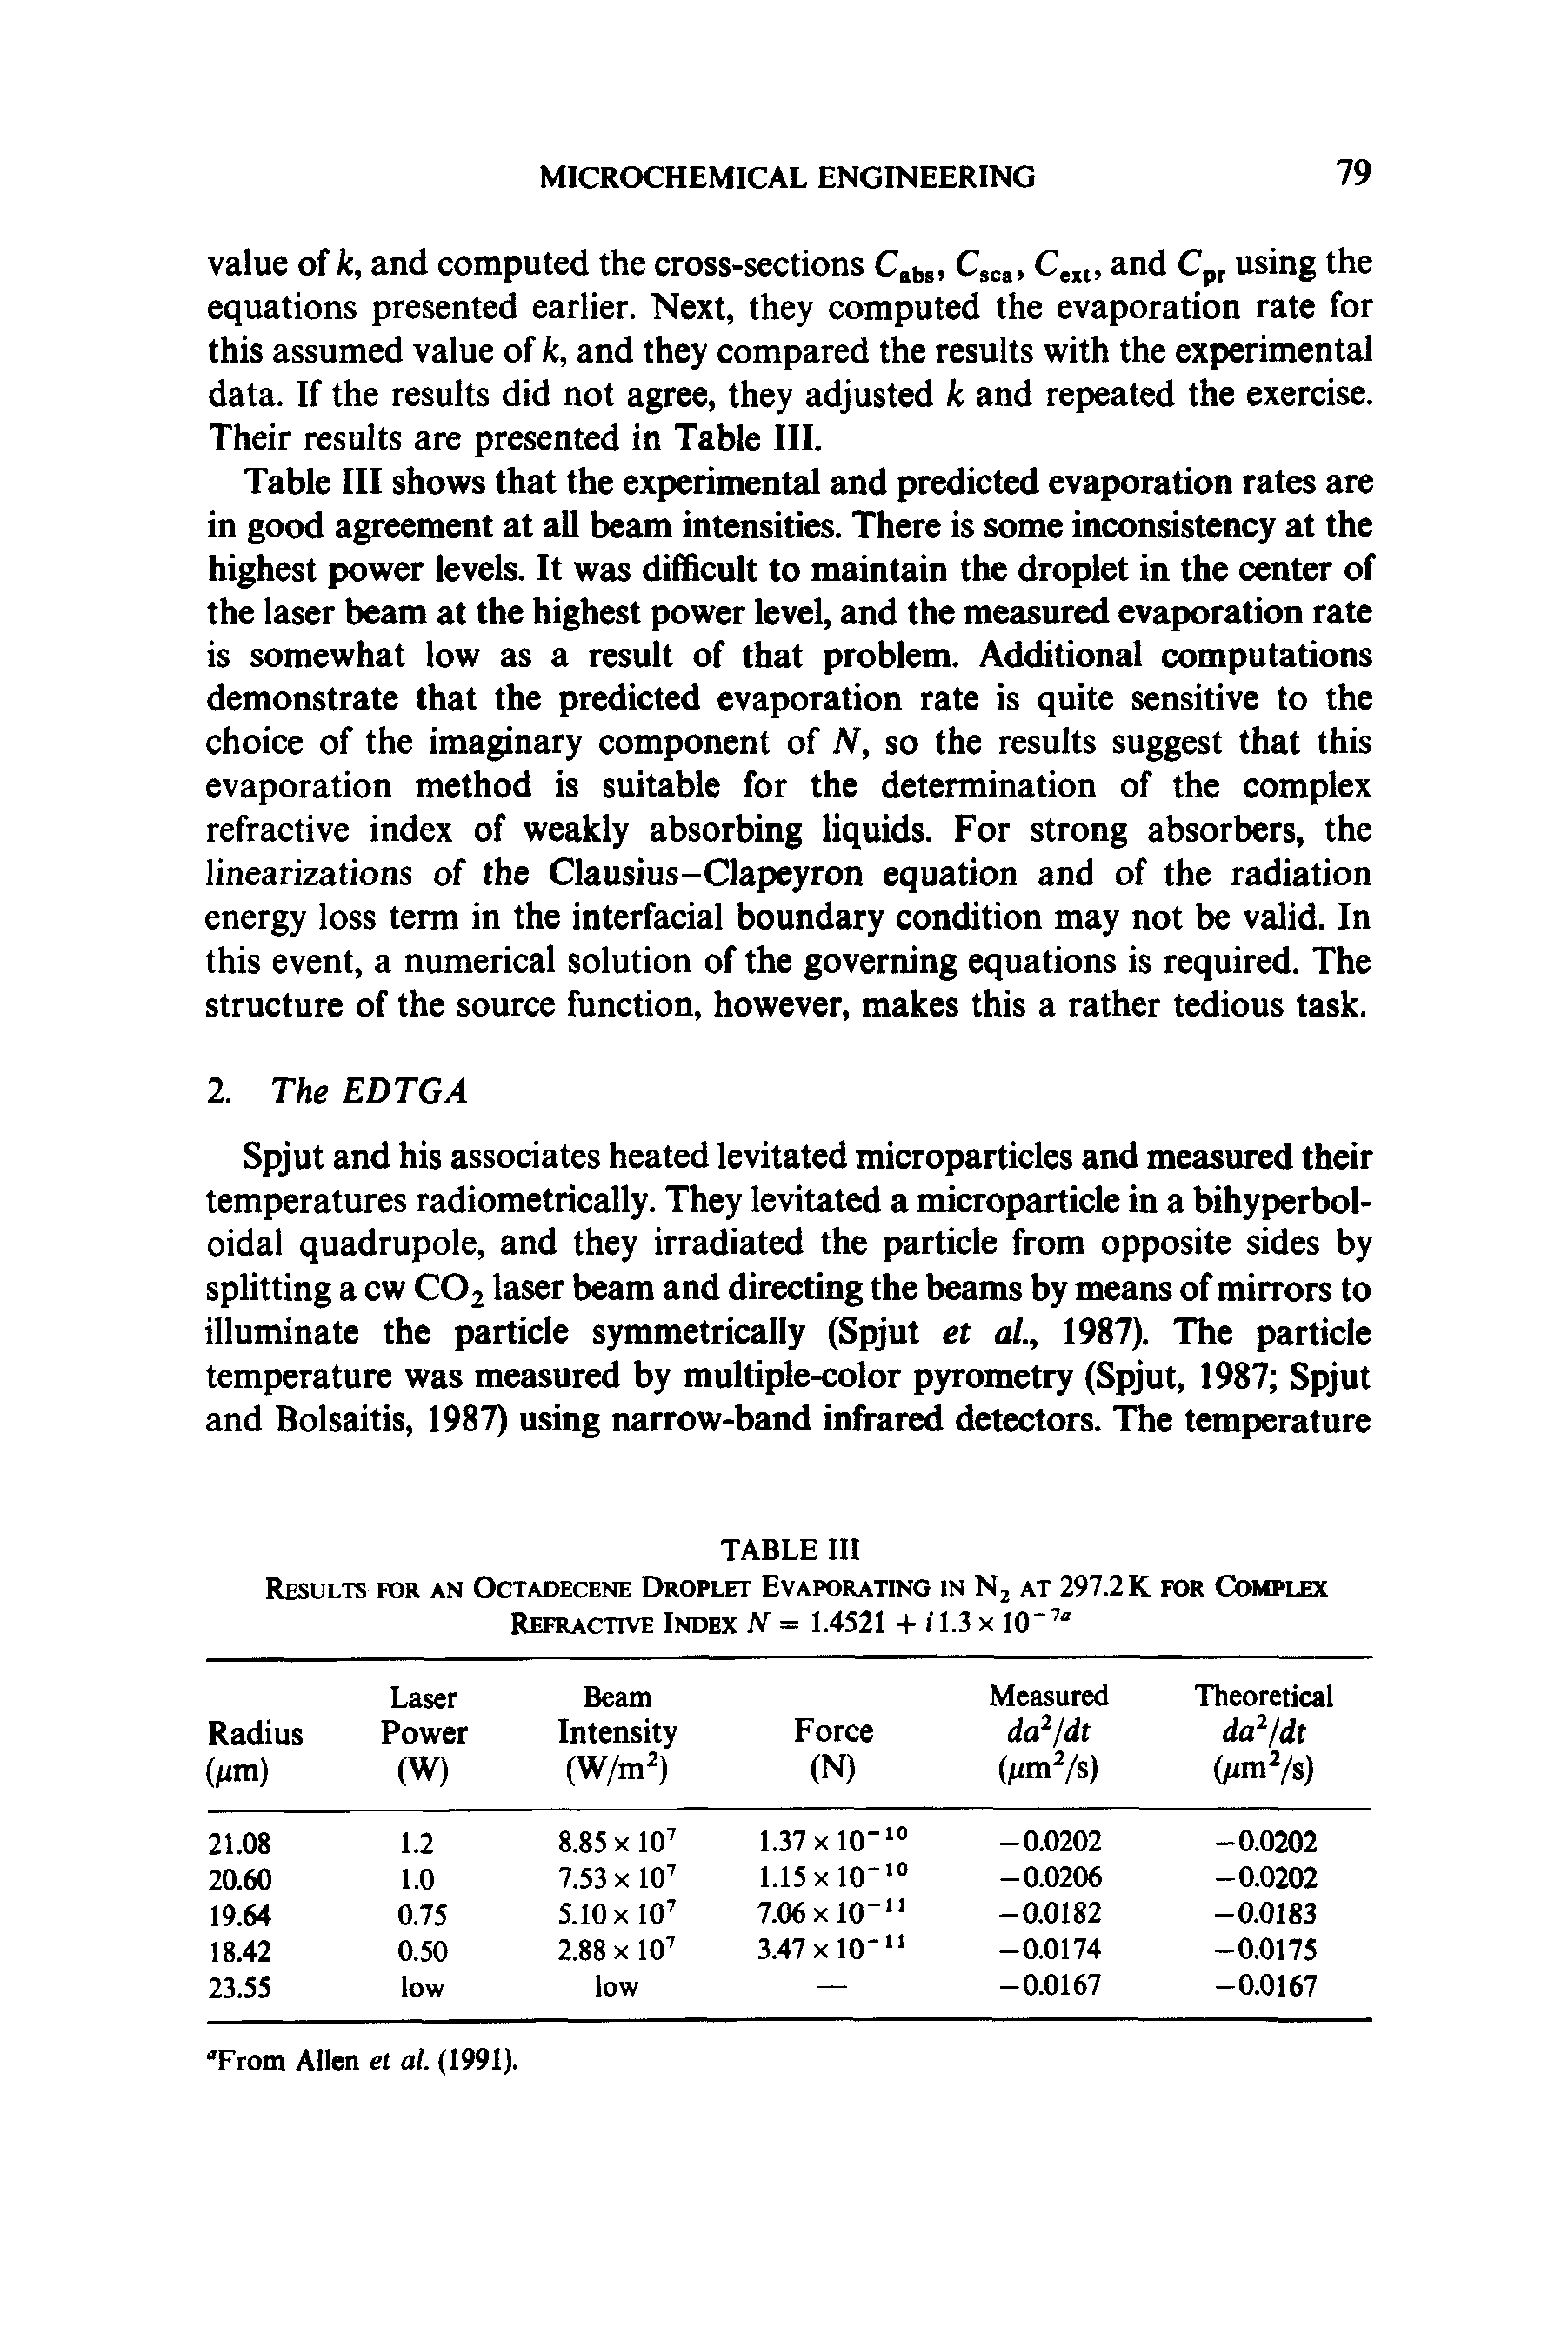 Table III shows that the experimental and predicted evaporation rates are in good agreement at all beam intensities. There is some inconsistency at the highest power levels. It was difficult to maintain the droplet in the center of the laser beam at the highest power level, and the measured evaporation rate is somewhat low as a result of that problem. Additional computations demonstrate that the predicted evaporation rate is quite sensitive to the choice of the imaginary component of N, so the results suggest that this evaporation method is suitable for the determination of the complex refractive index of weakly absorbing liquids. For strong absorbers, the linearizations of the Clausius-Clapeyron equation and of the radiation energy loss term in the interfacial boundary condition may not be valid. In this event, a numerical solution of the governing equations is required. The structure of the source function, however, makes this a rather tedious task.